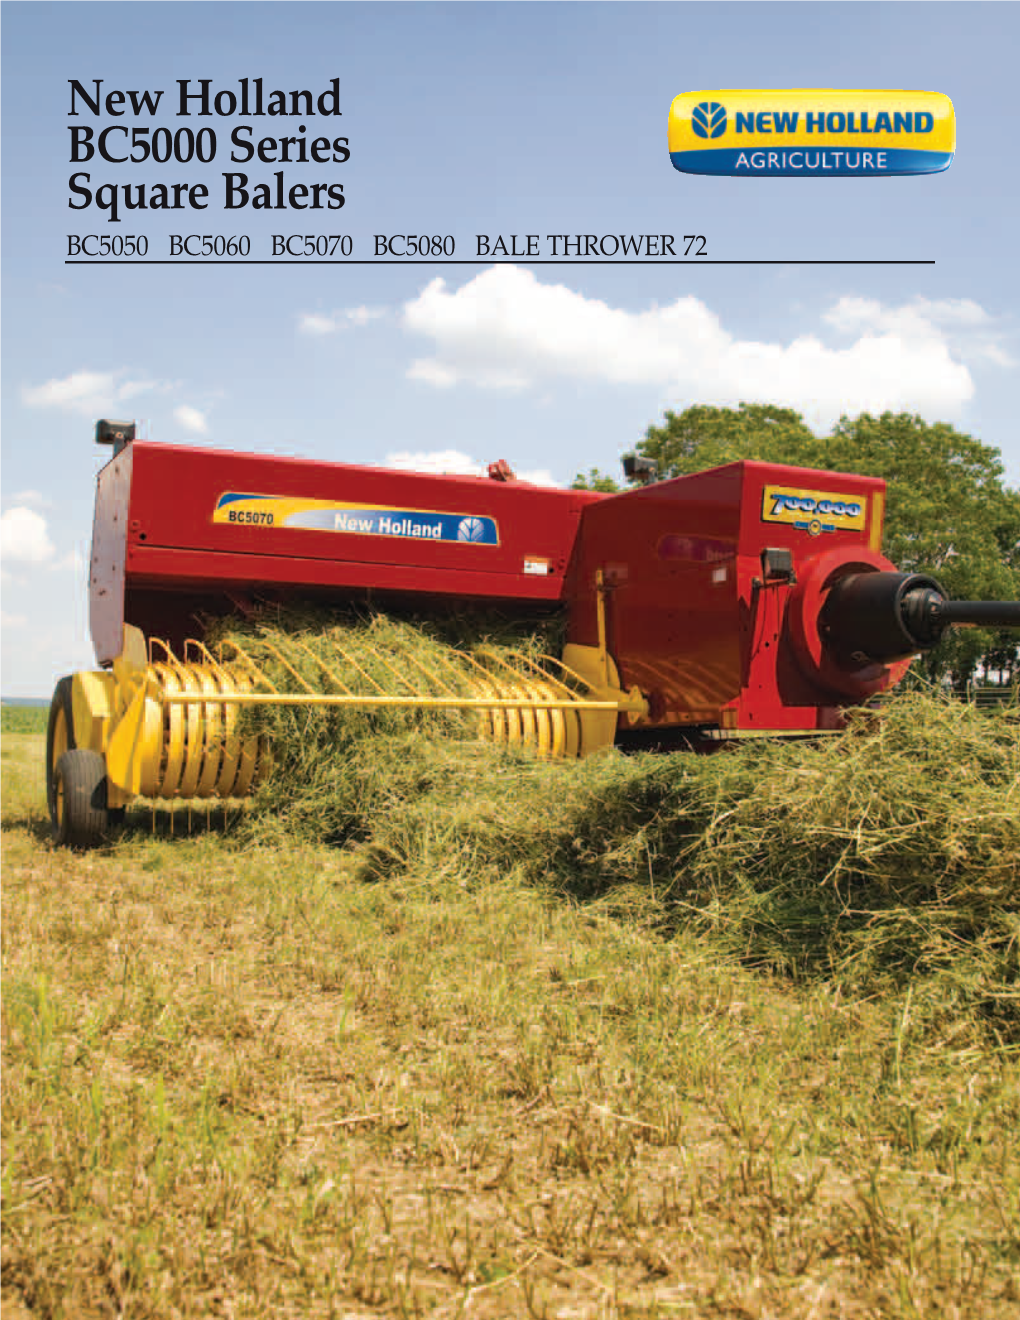 New Holland BC5000 Series Square Balers BC5050 BC5060 BC5070 BC5080 BALE THROWER 72 a Proud Heritage of Innovation